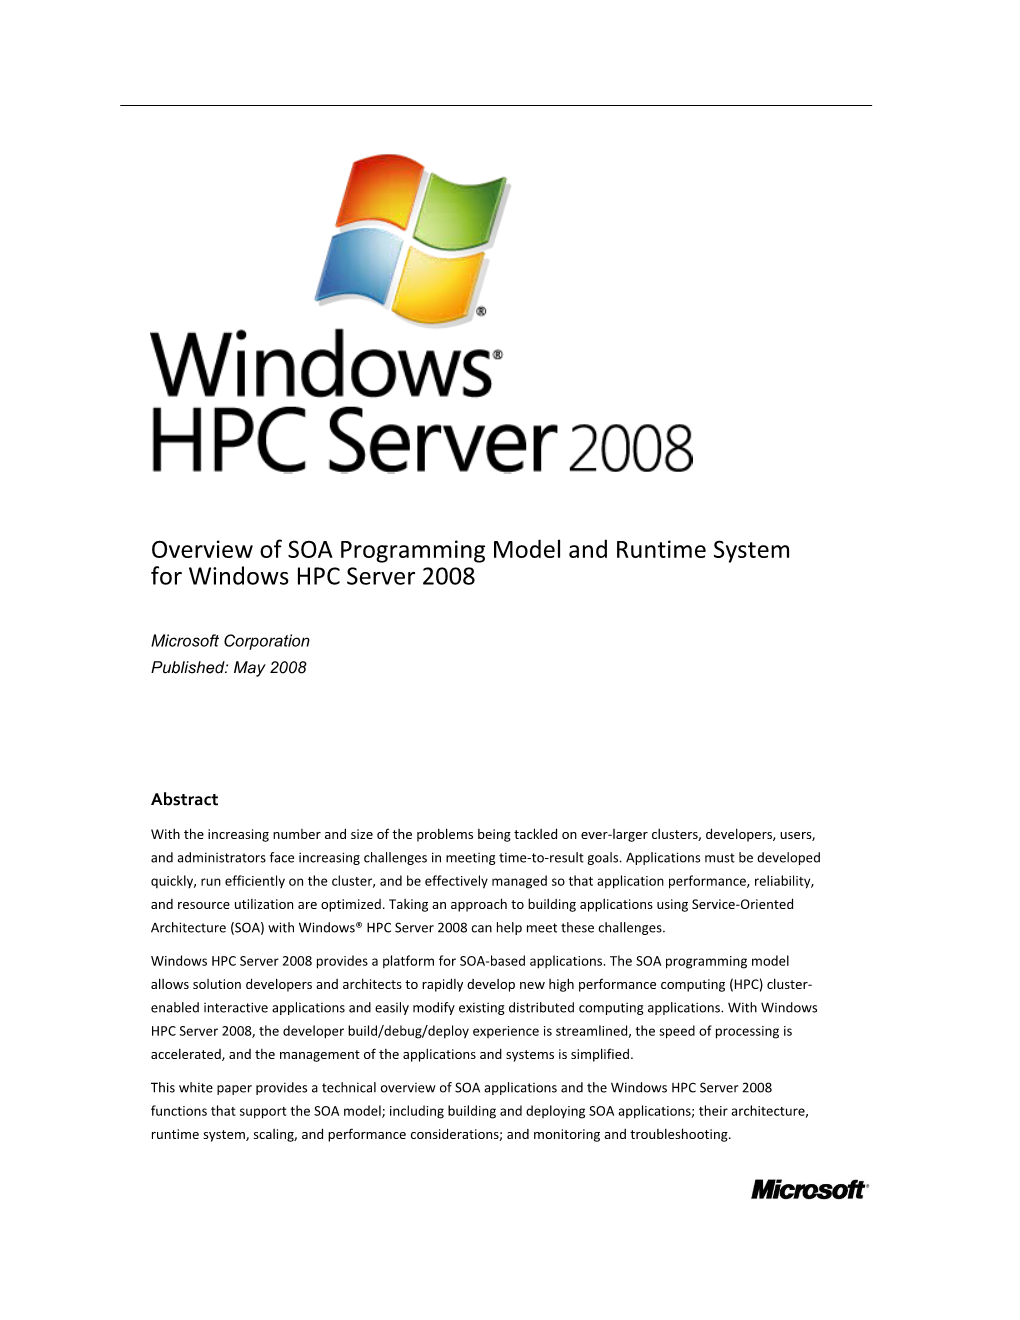 Overview of SOA Programming Model and Runtime System for Windows HPC Server 2008